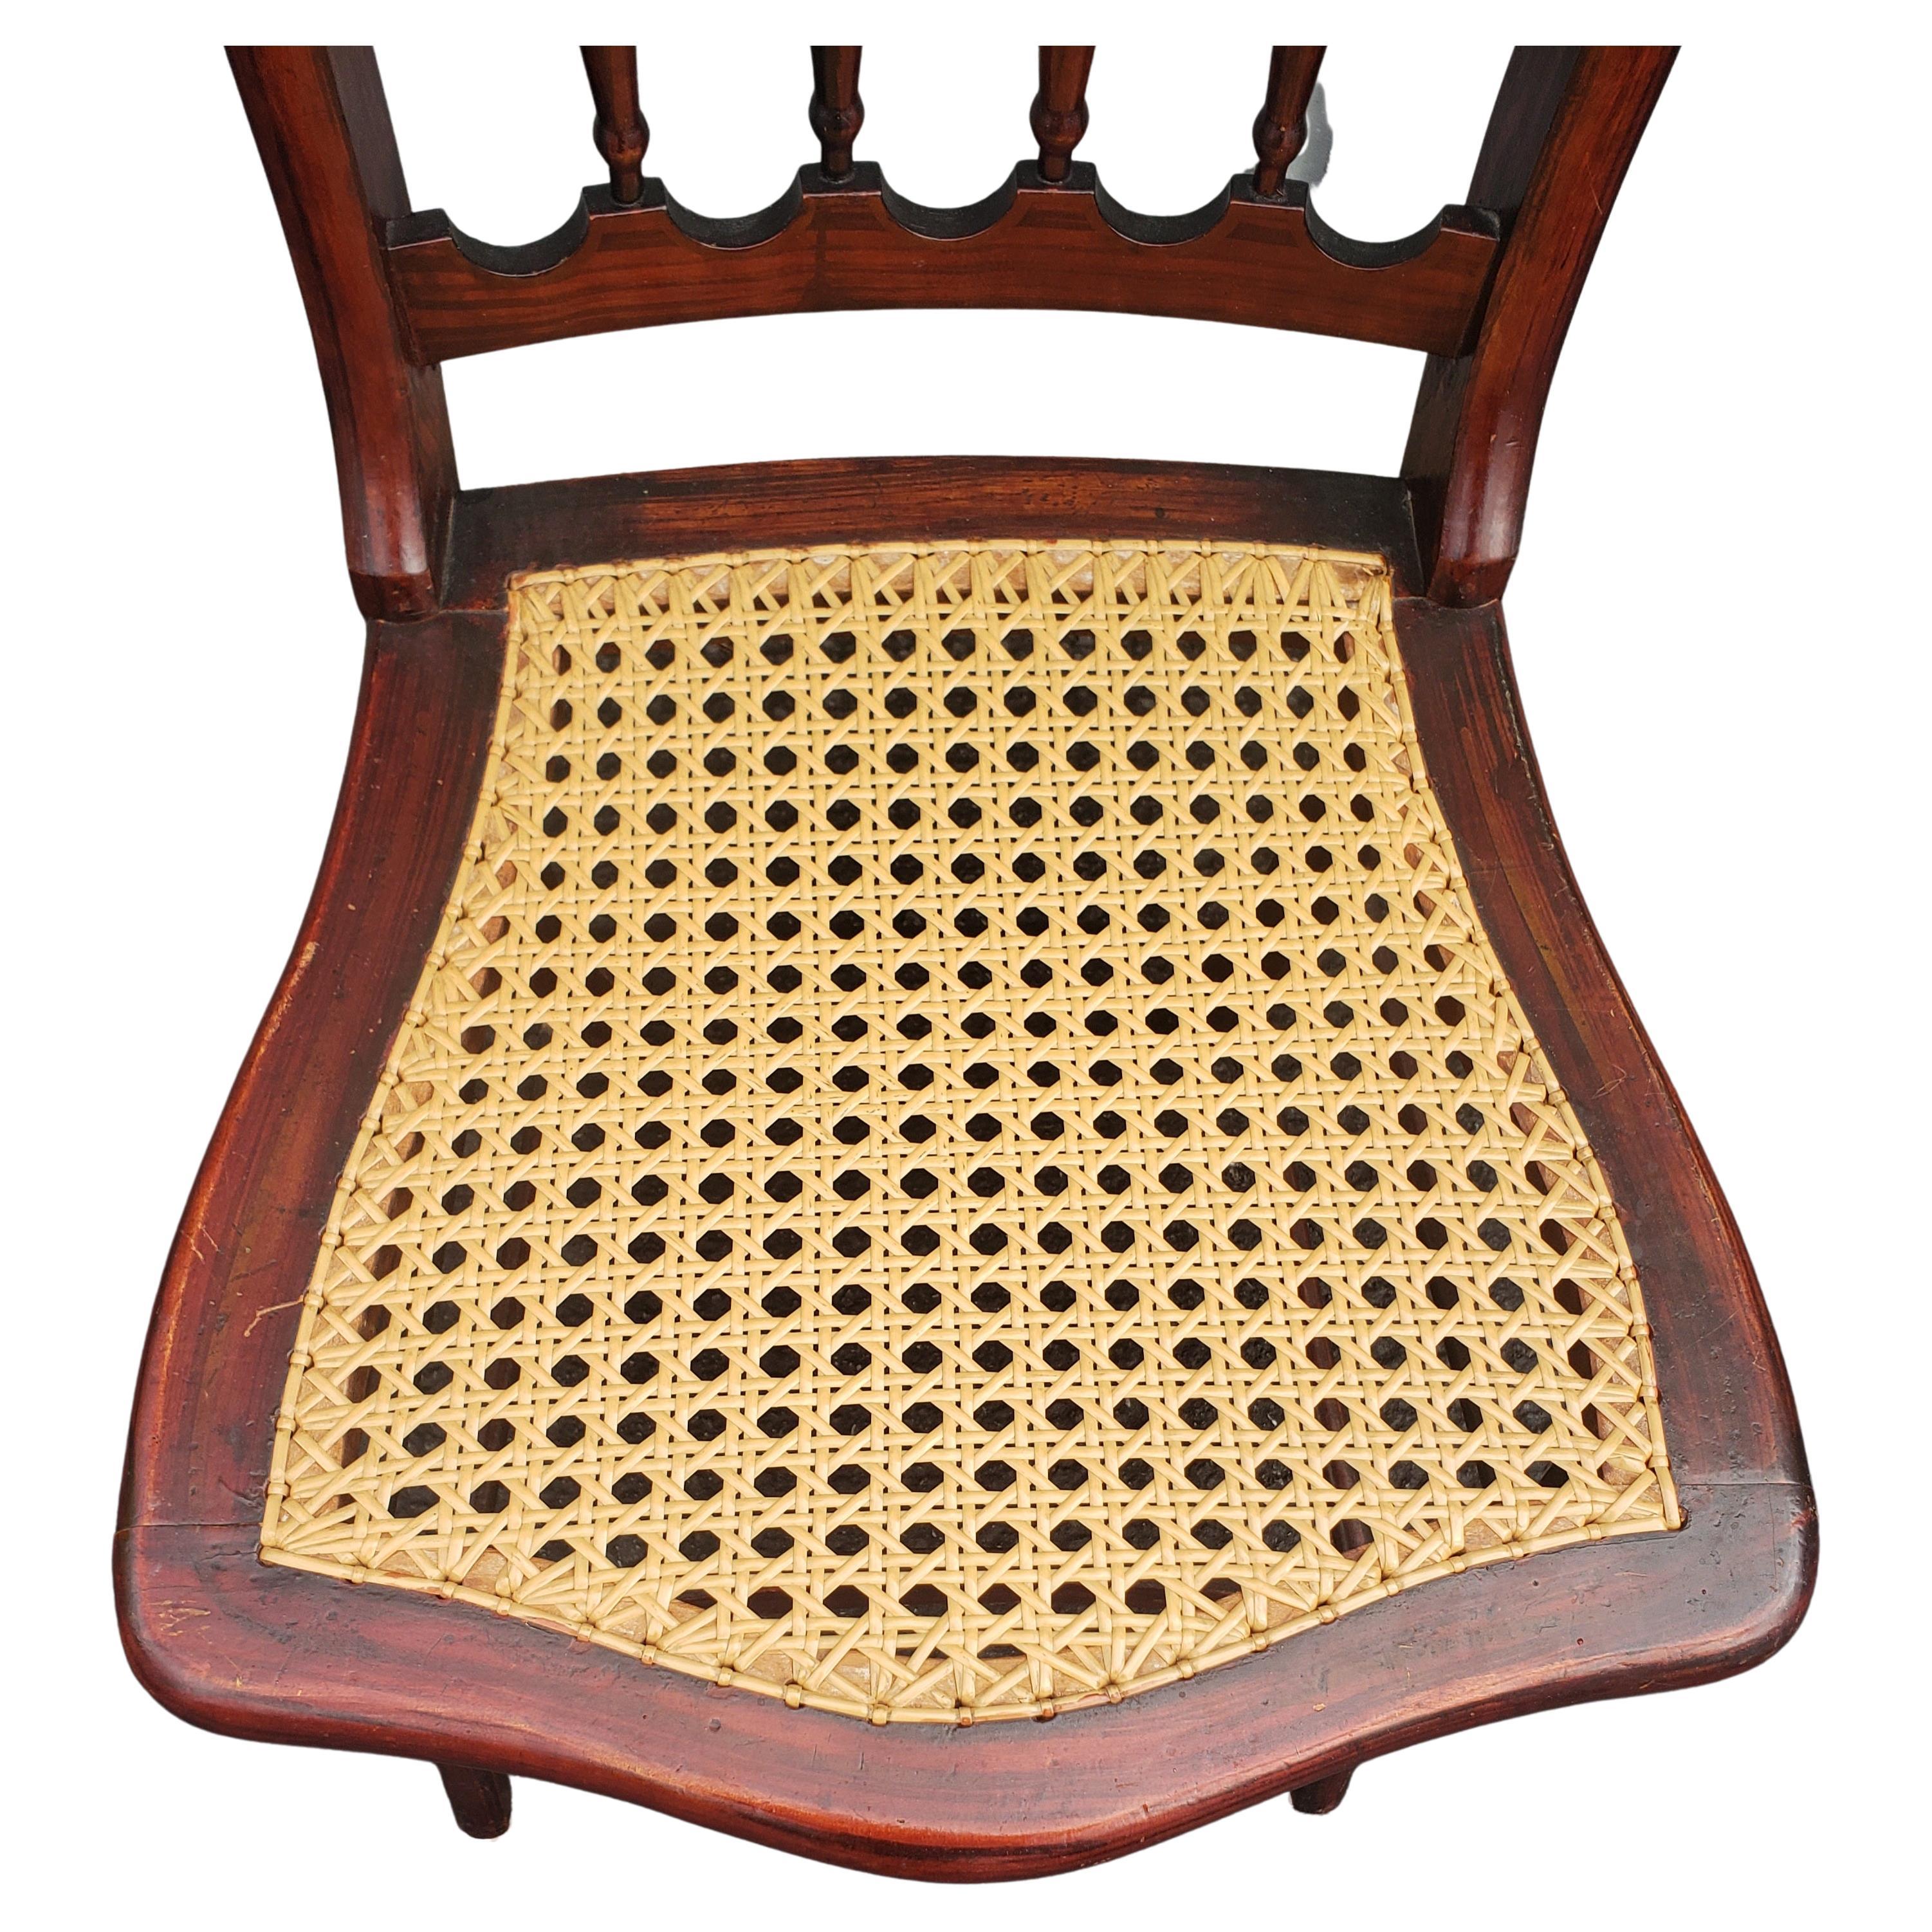 19th Century Victorian American Flame Mahogany with Inlays Spindle Back and Cane Seat Chair For Sale